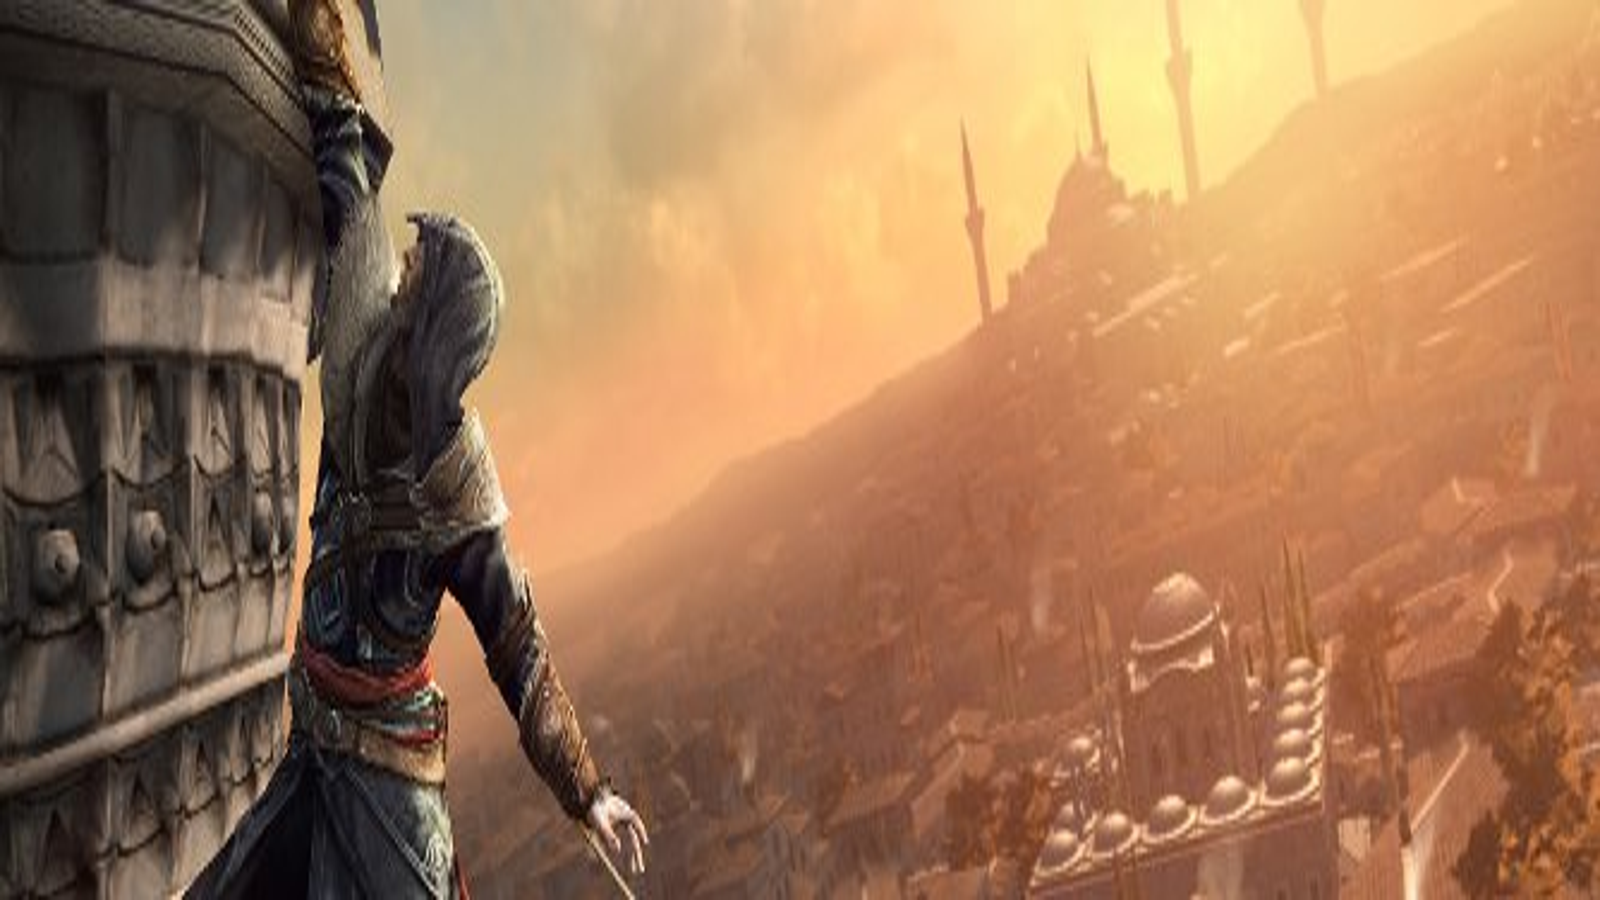 Assassin's Creed Revelations Preview - Combat Trailer Arrives For Assassin's  Creed Revelations - Game Informer